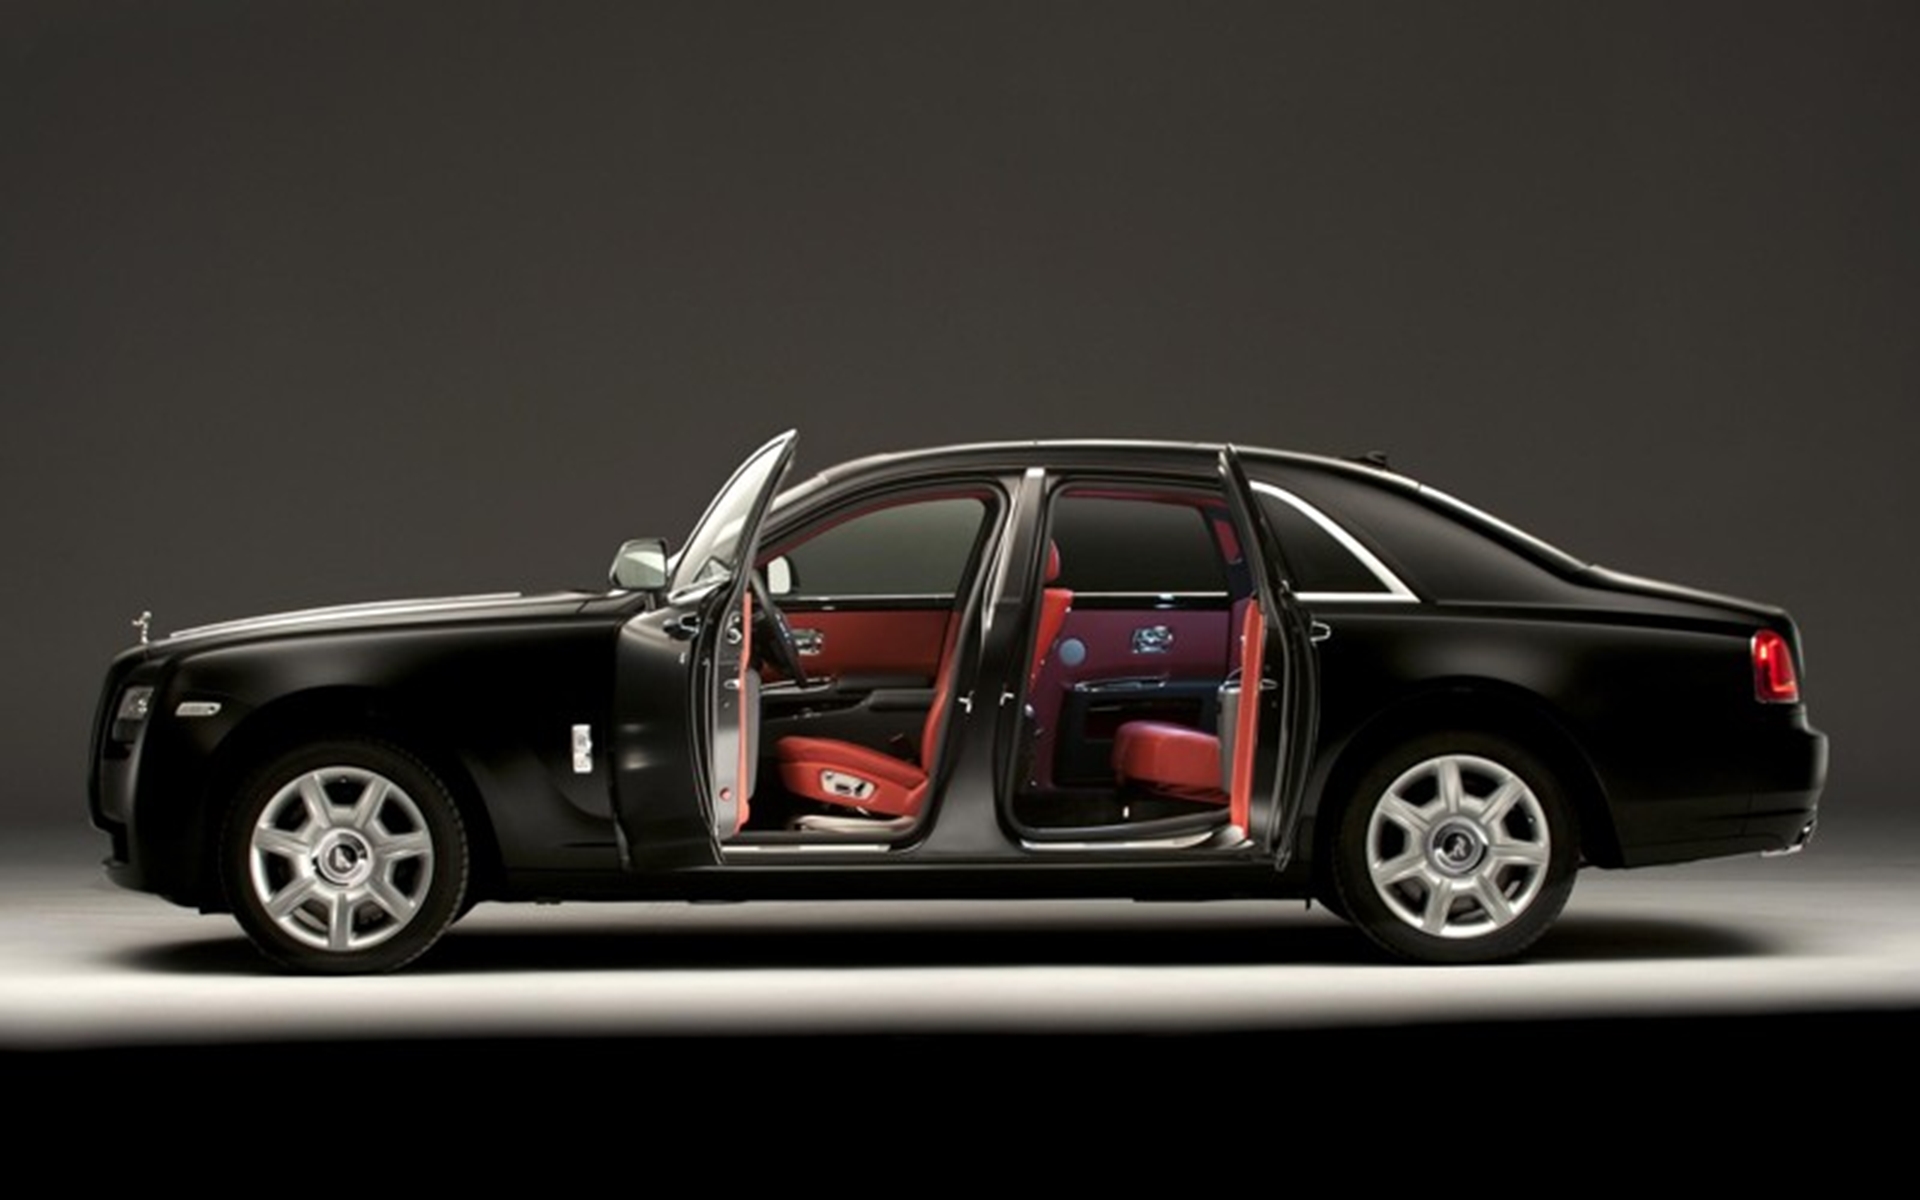 MORE ROLLS-ROYCE GHOST CLIENTS TURN TO BESPOKE PERSONALISATION